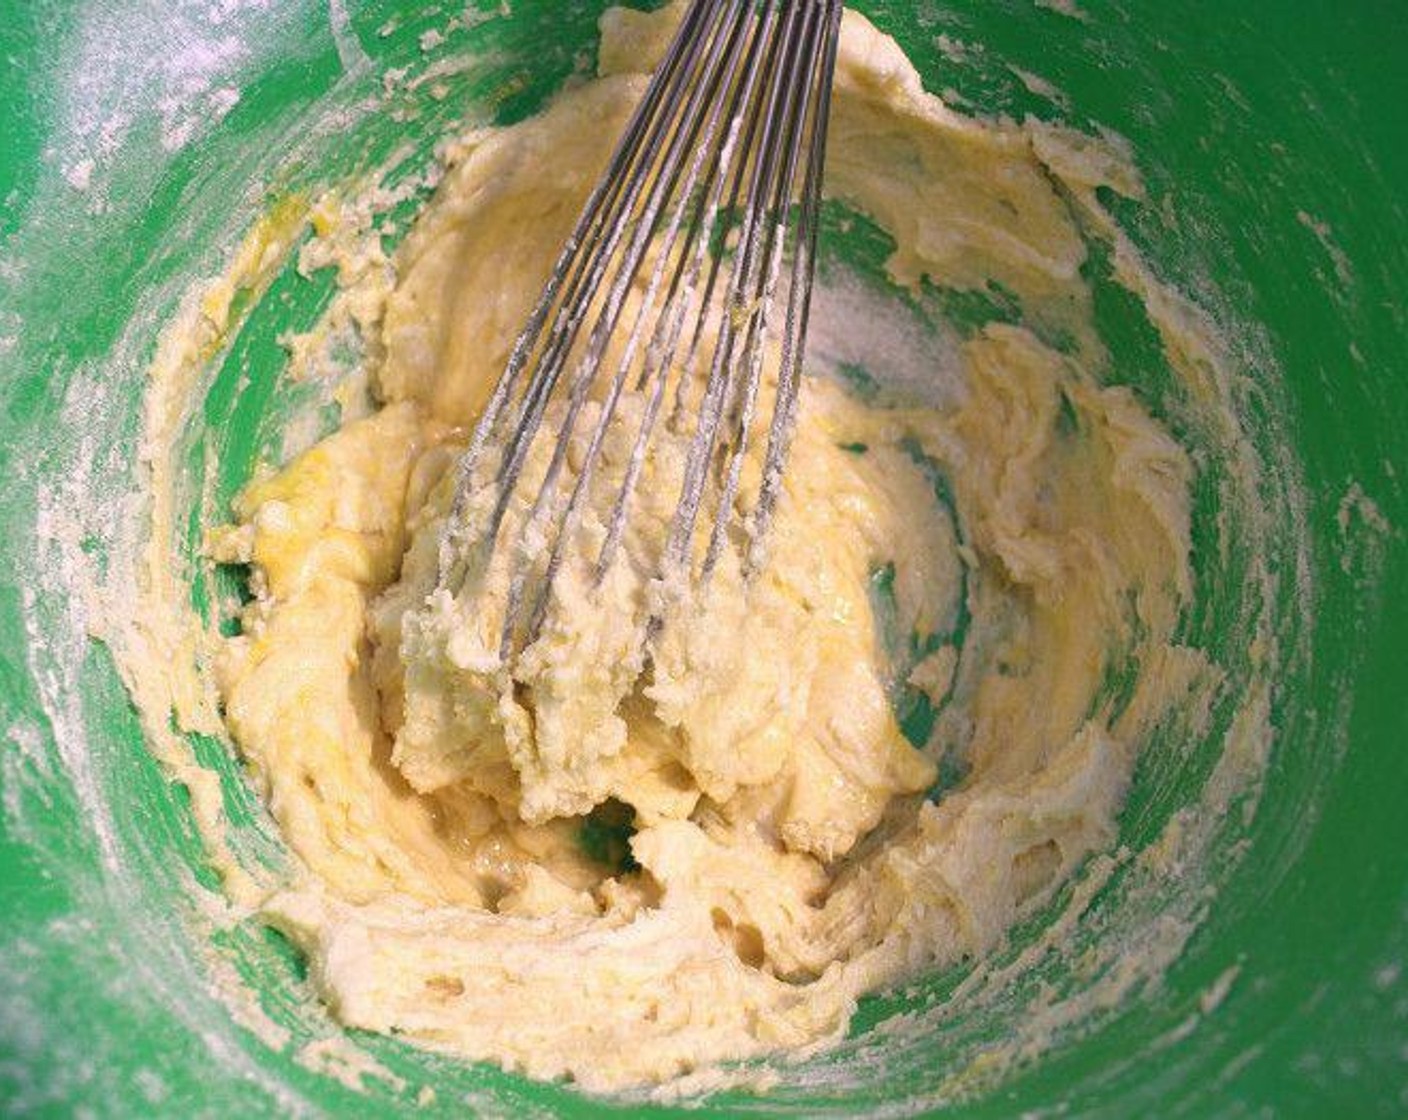 step 2 Cream together Granulated Sugar (1 cup) and Unsalted Butter (1/2 cup). Add All-Purpose Flour (1 cup), Baking Powder (1 tsp), Salt (1 pinch), and Eggs (2). Beat well for a couple of minutes.